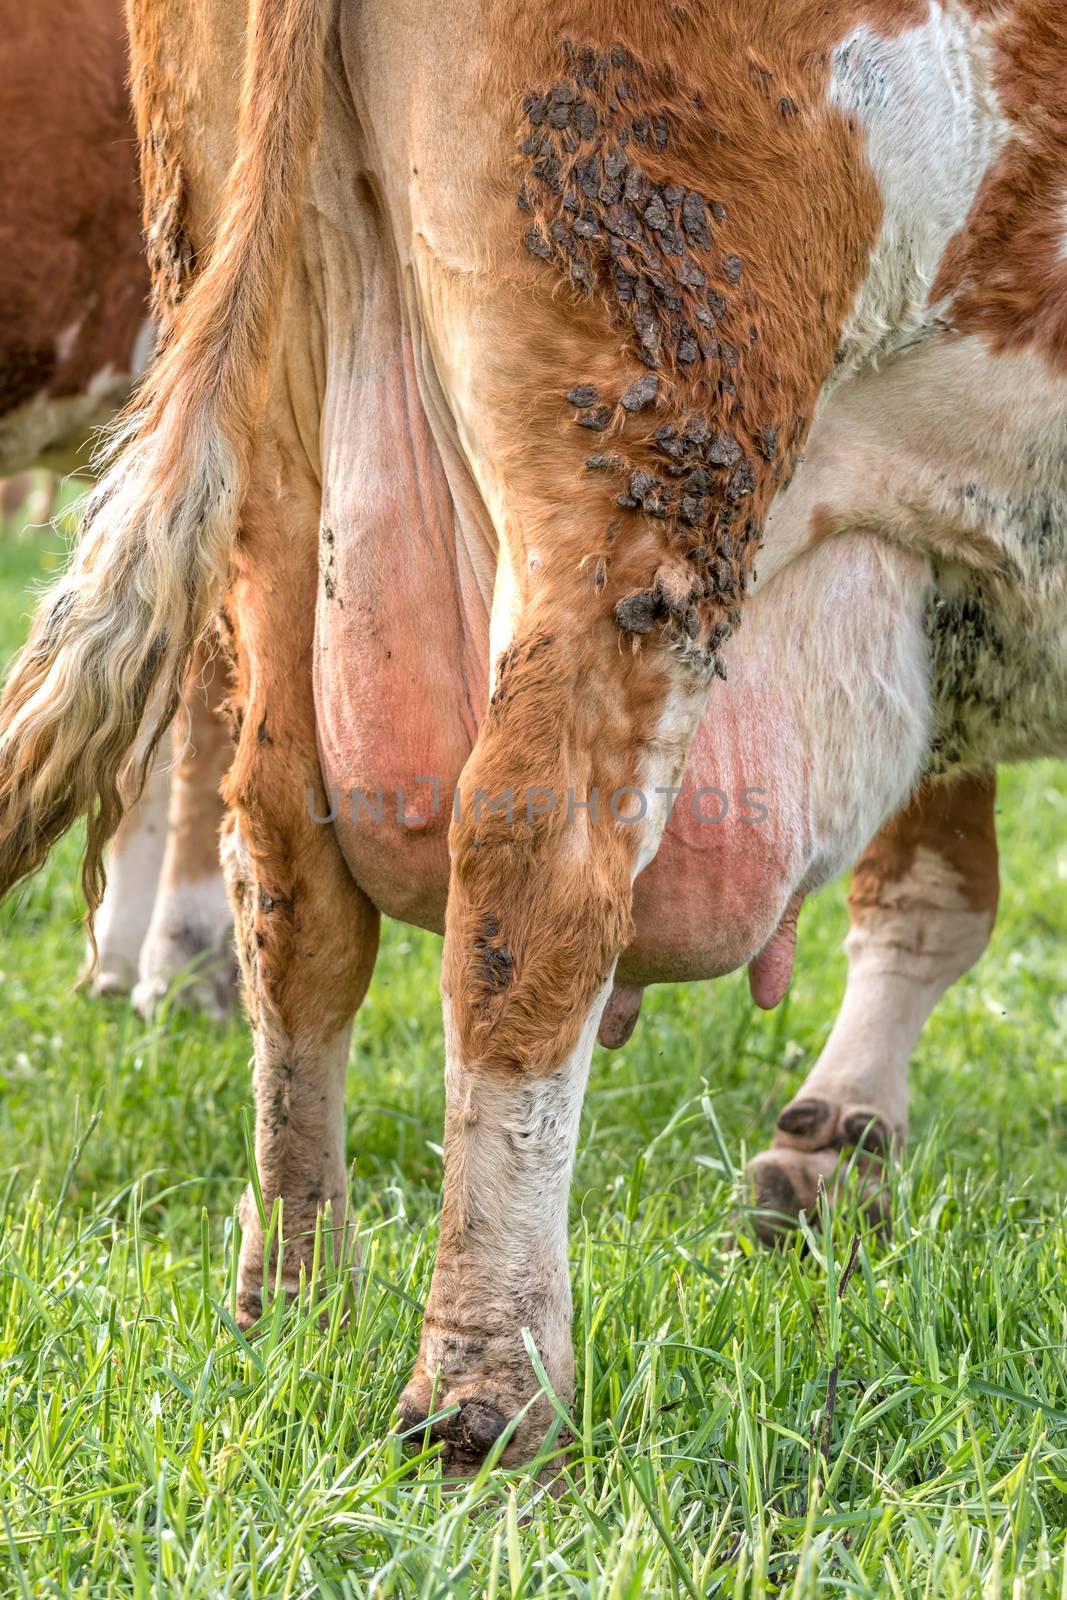 The Udder and Teats of a Dairy Milking Cow